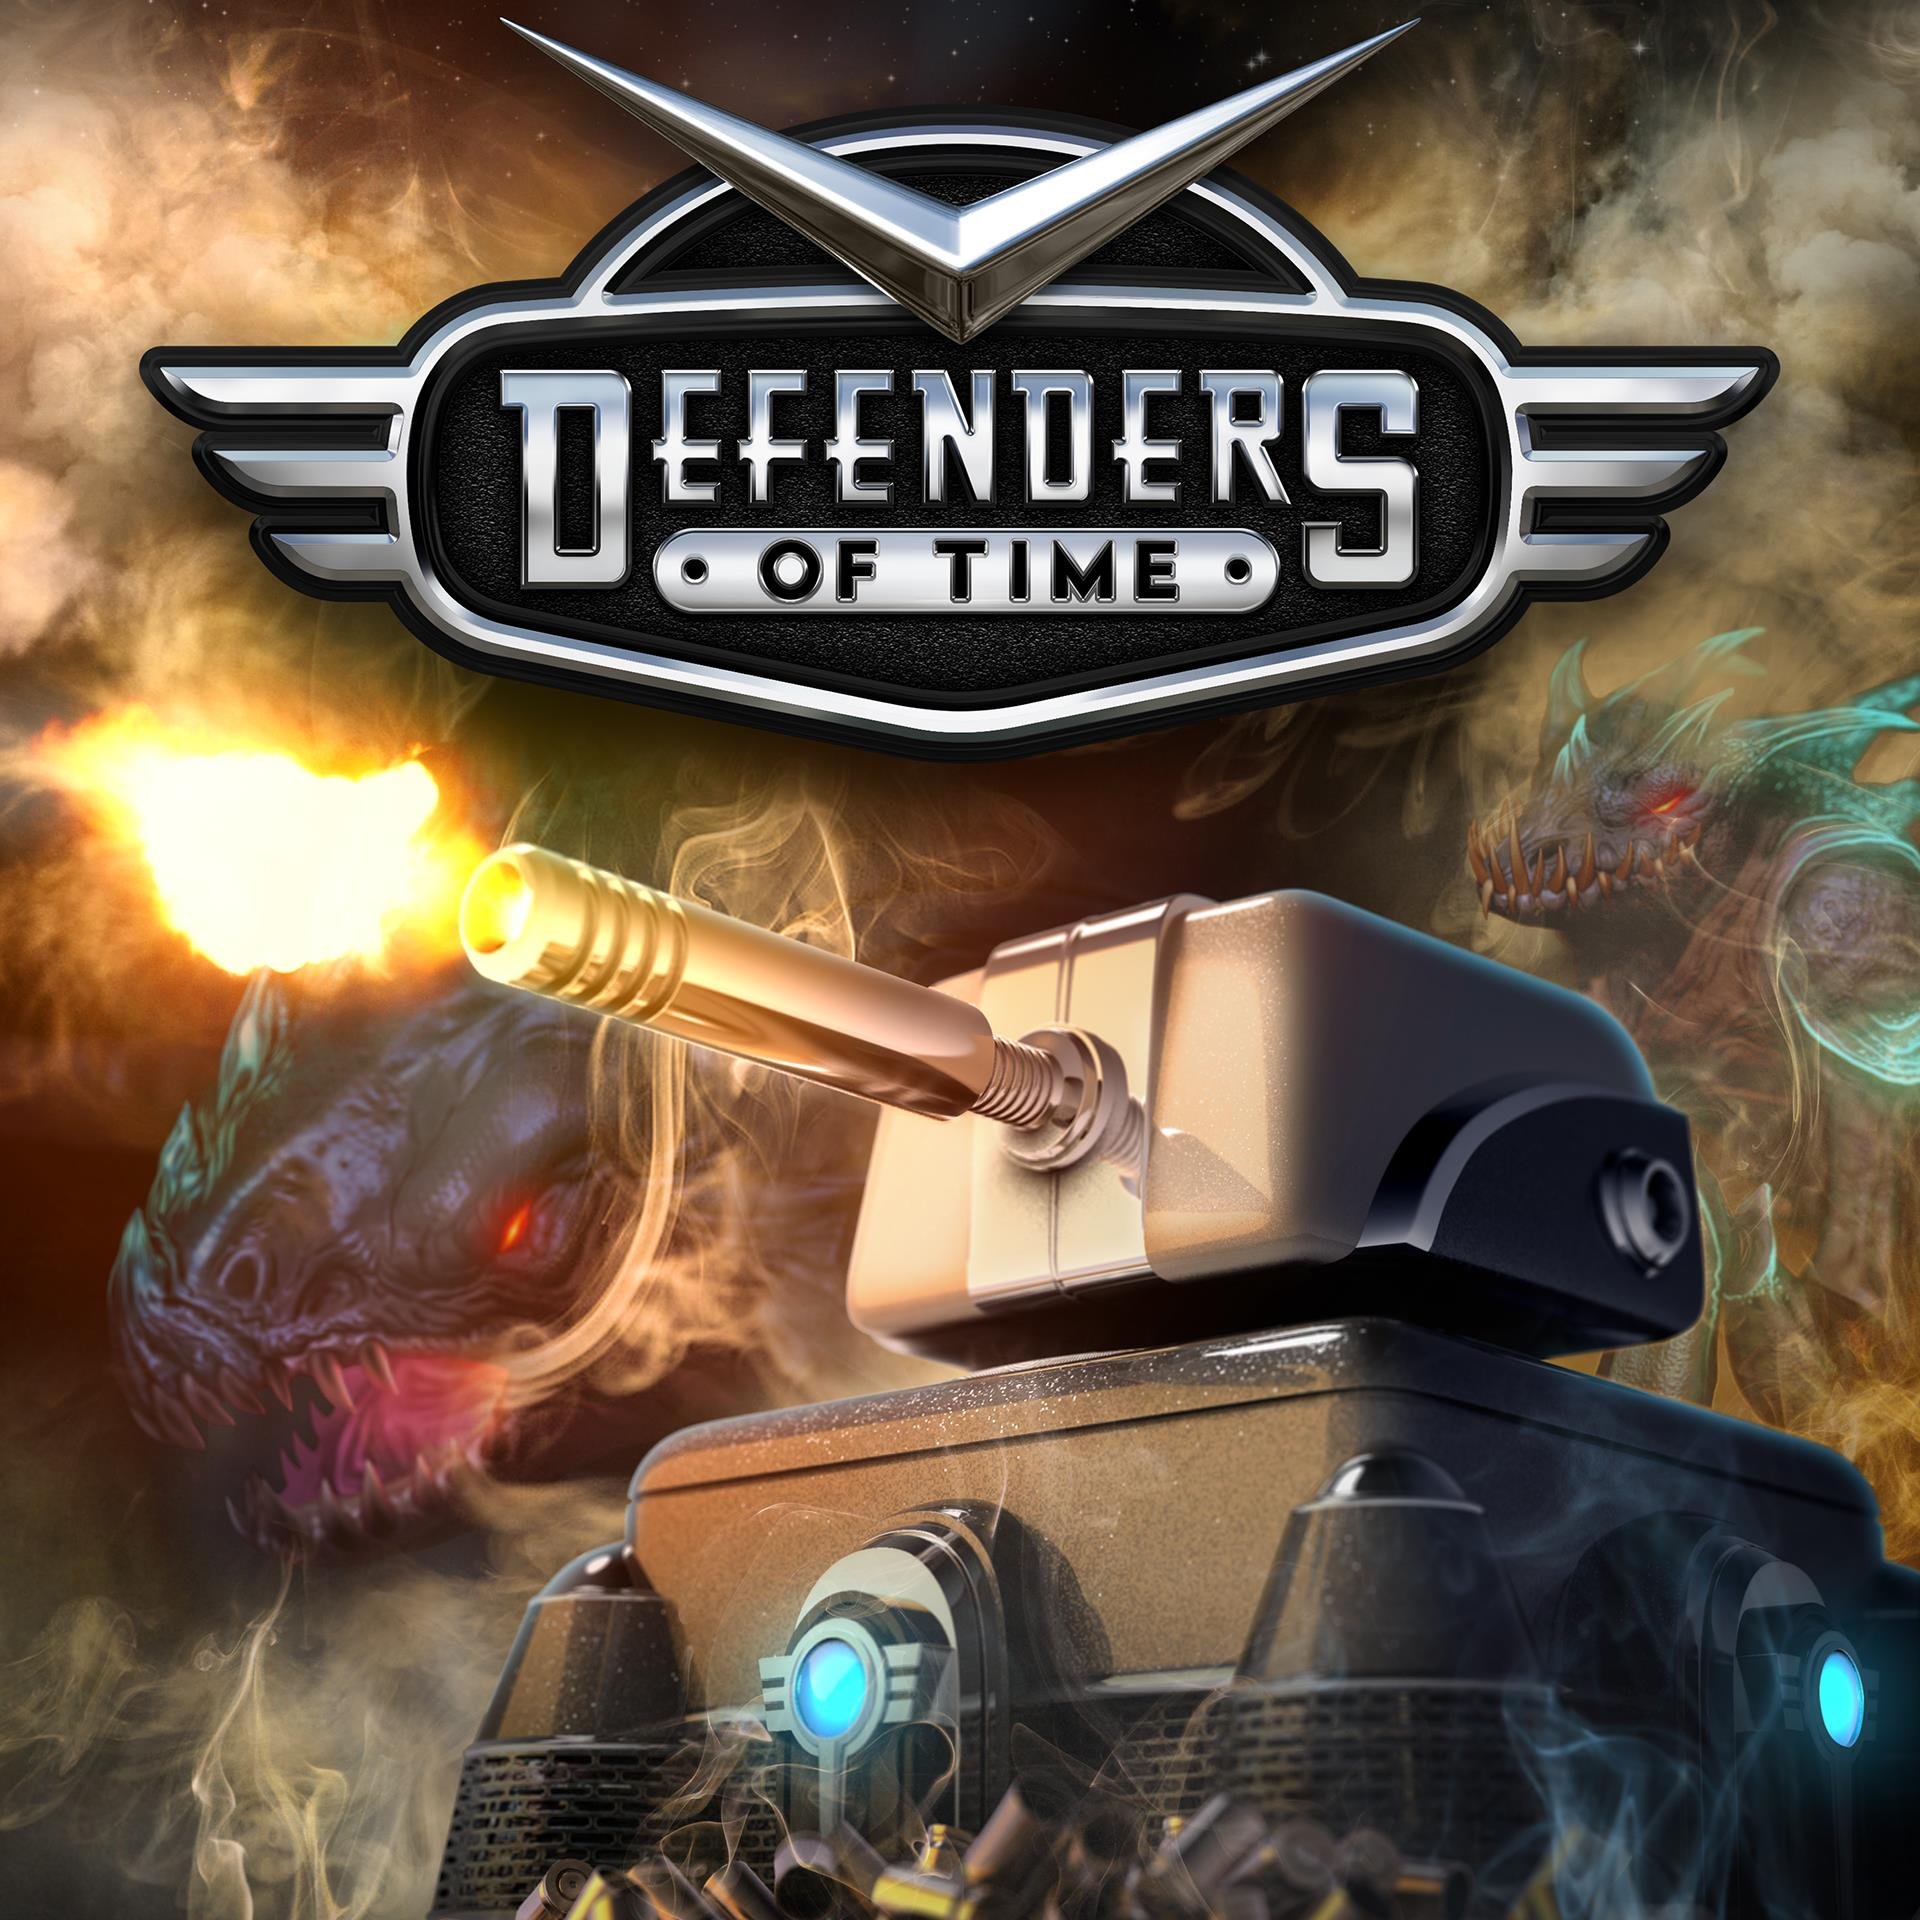 Defenders of Time brings a new level of play to the world of tower defense with a multiplayer focus. Single player, 1v4, 4v4 and every combination in between!